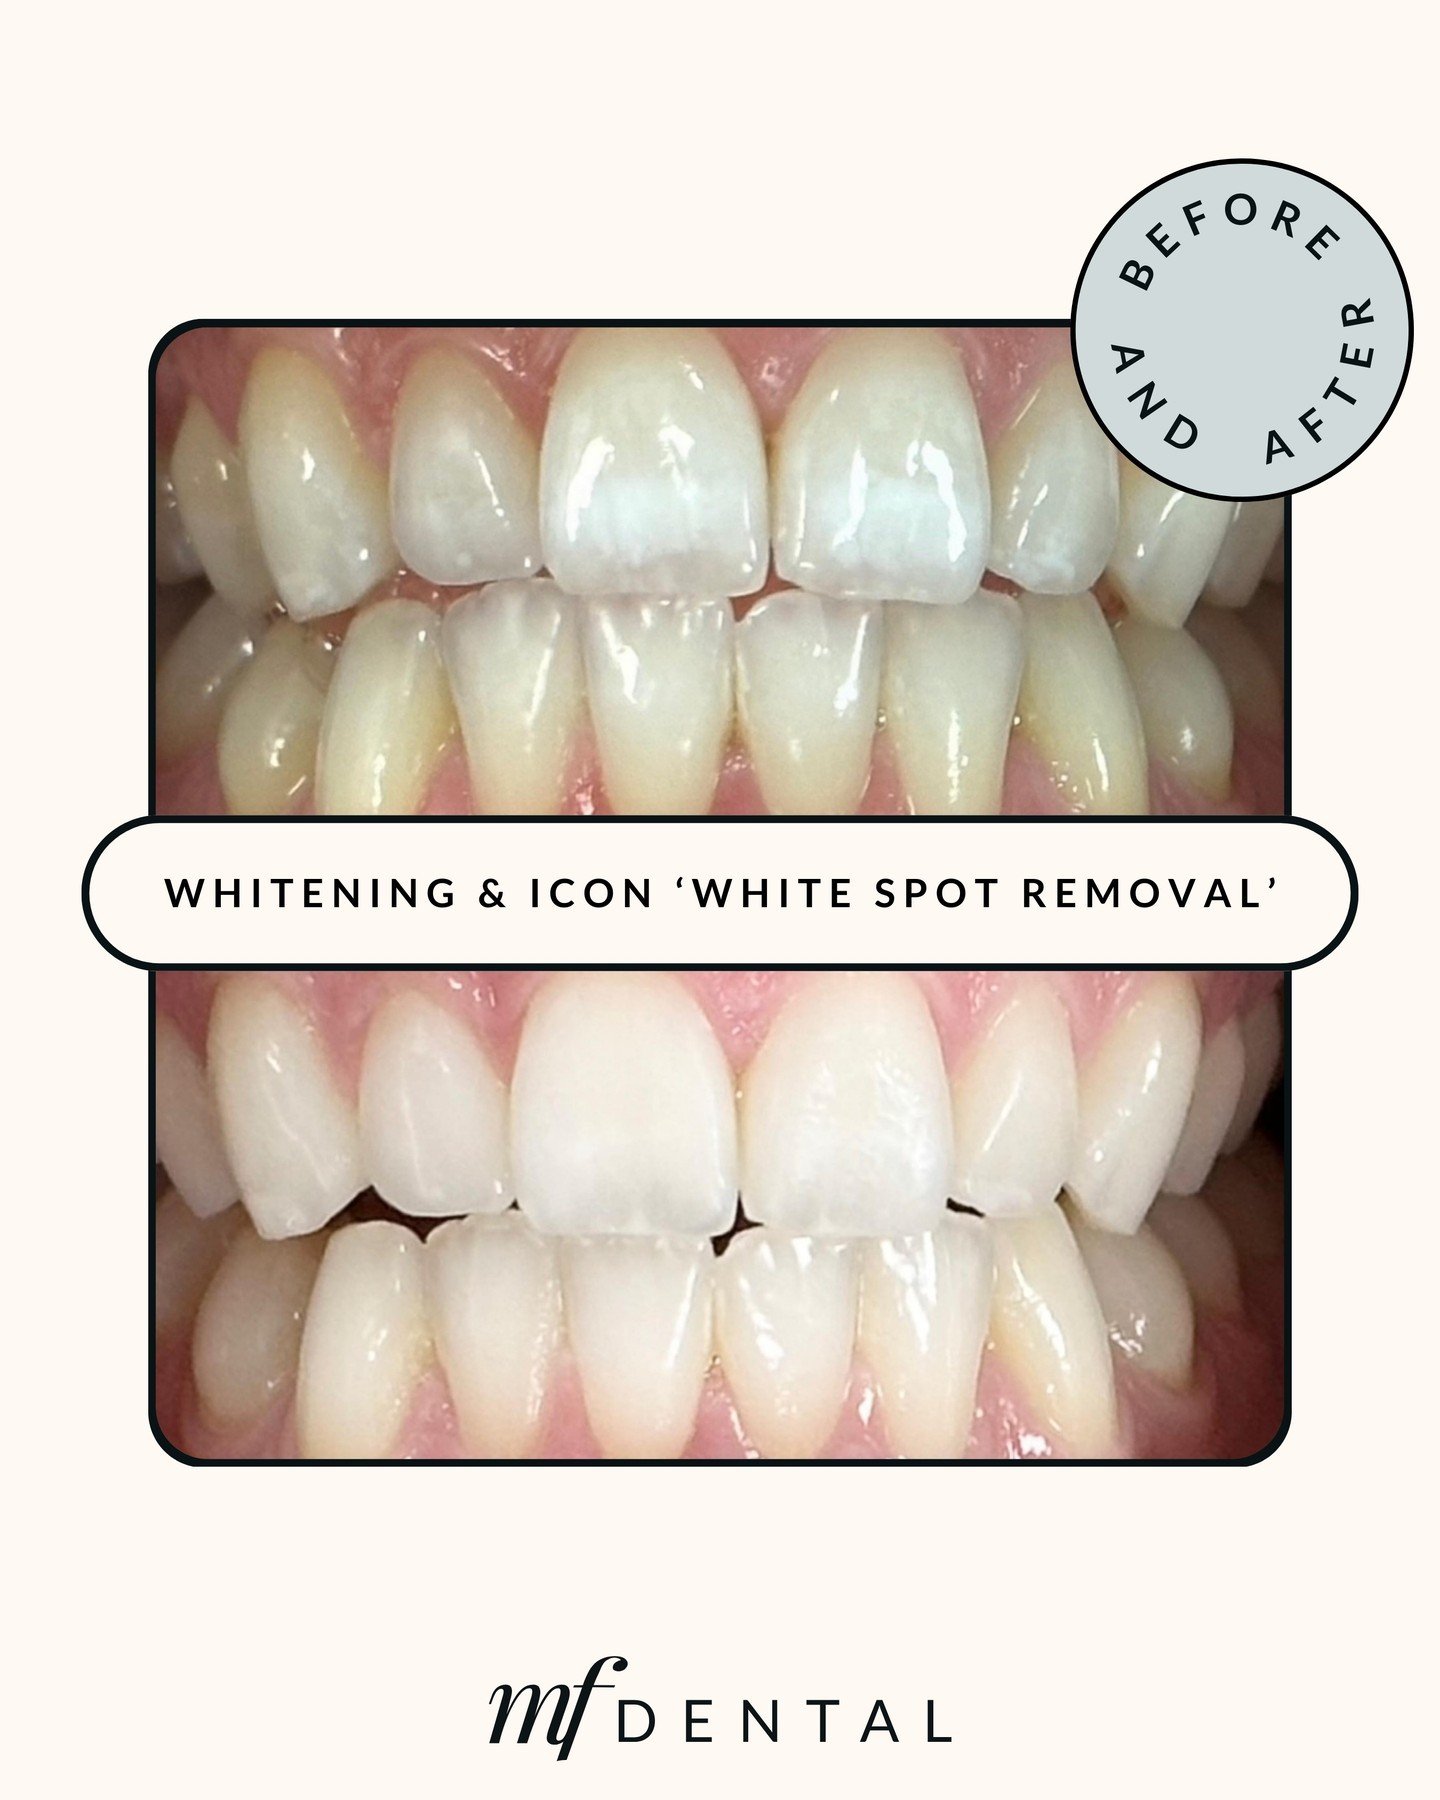 Icon White Spot Removal offers a gentle solution to enhance the look of white spots on teeth. Through the use of a specialised resin infiltrant combined with teeth whitening, this treatment seamlessly integrates the affected areas with the surroundin